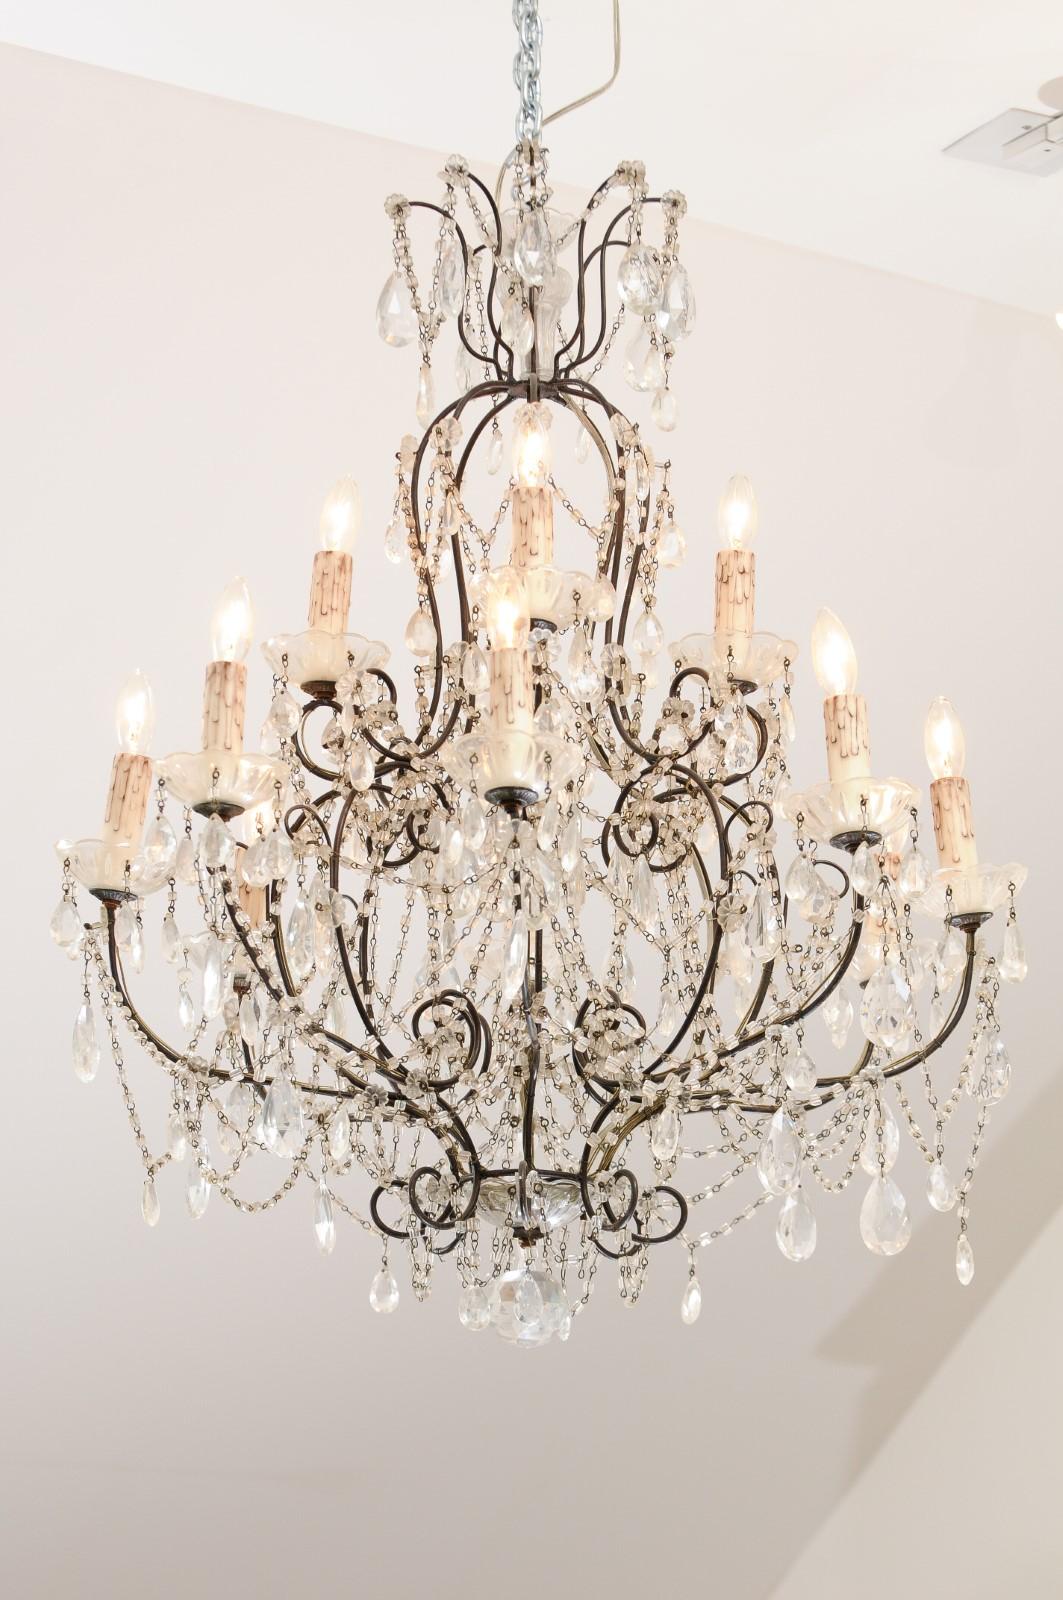 Italian 19th Century 10-Light Crystal and Iron Chandelier with Scrolling Arms For Sale 7